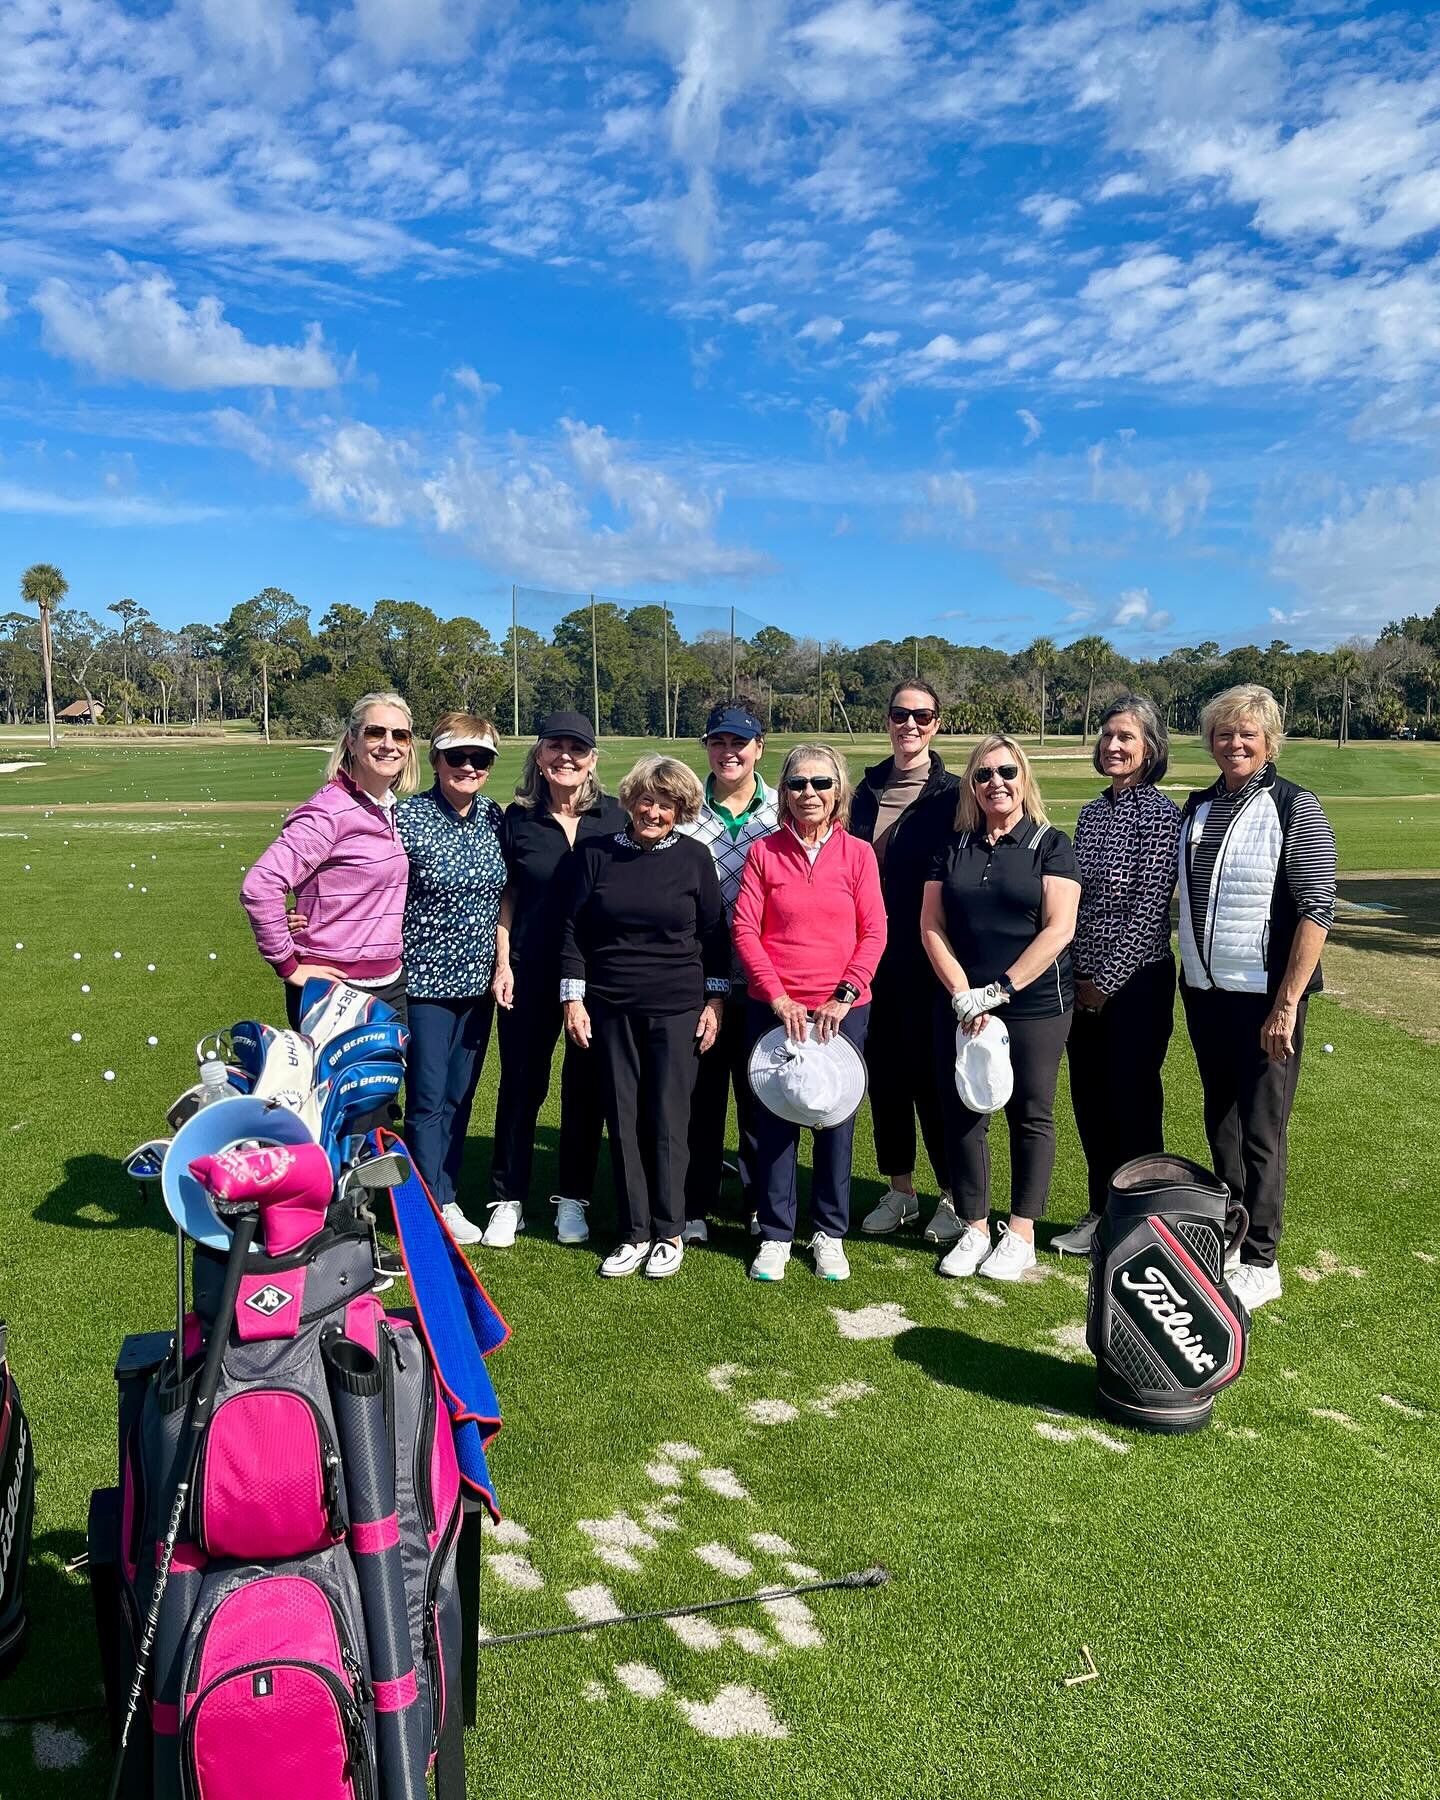 Day 2 &amp; Day 3 ✔️⛳️☀️
What a great time and much needed golf clinic with the amazing @juliecolegolf 

Our itinerary started with 2.5 hours golf clinic to brush off our winter dust! Thank you @juliecolegolf for the tips that changed by game! ⛳️

Ro